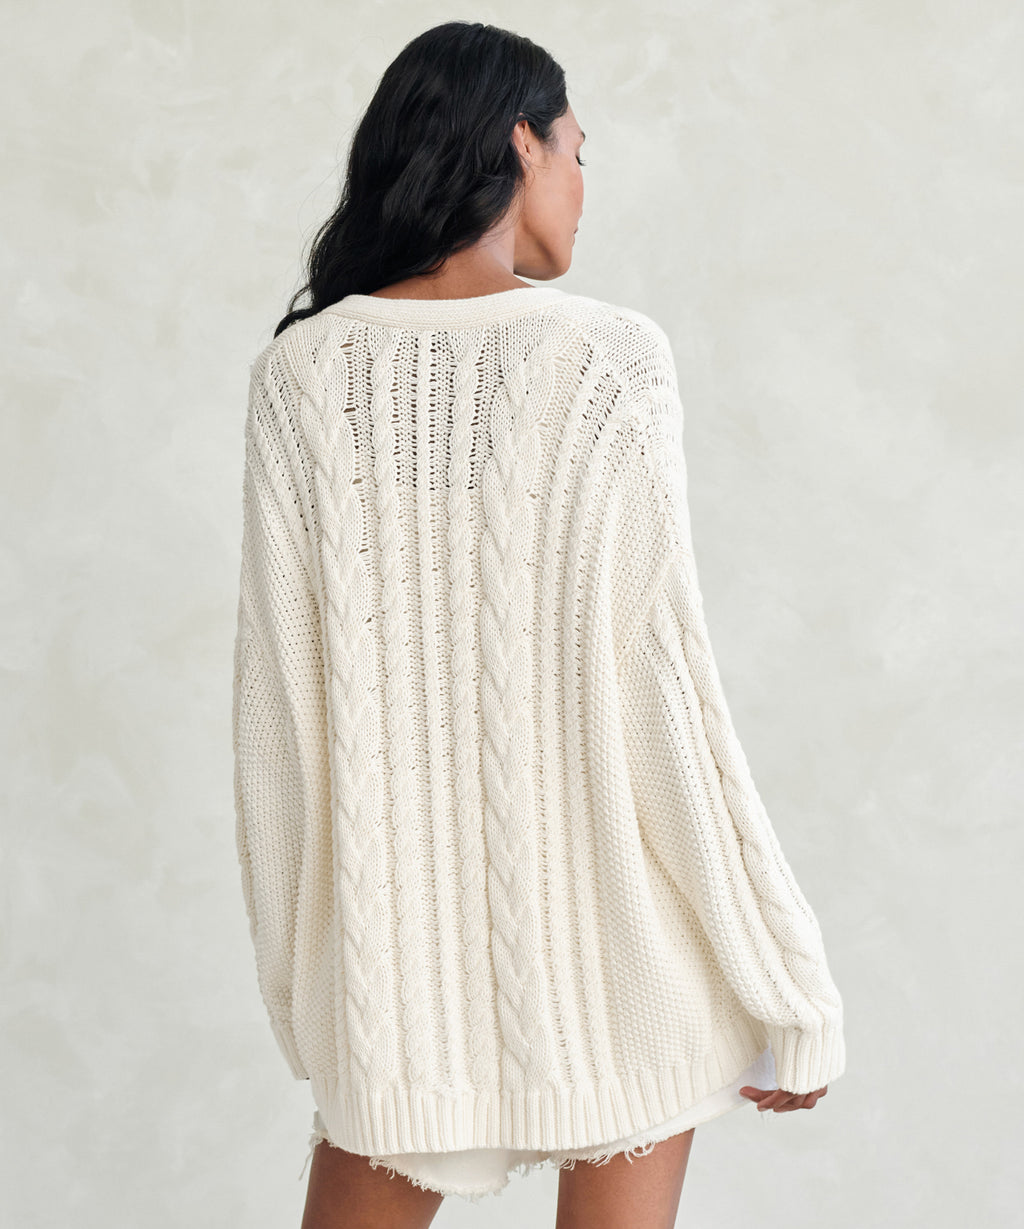 Cable Knit Style: 15 Stunning Patterns for Pullovers, Cardigans, Tanks, Tees & More [Book]